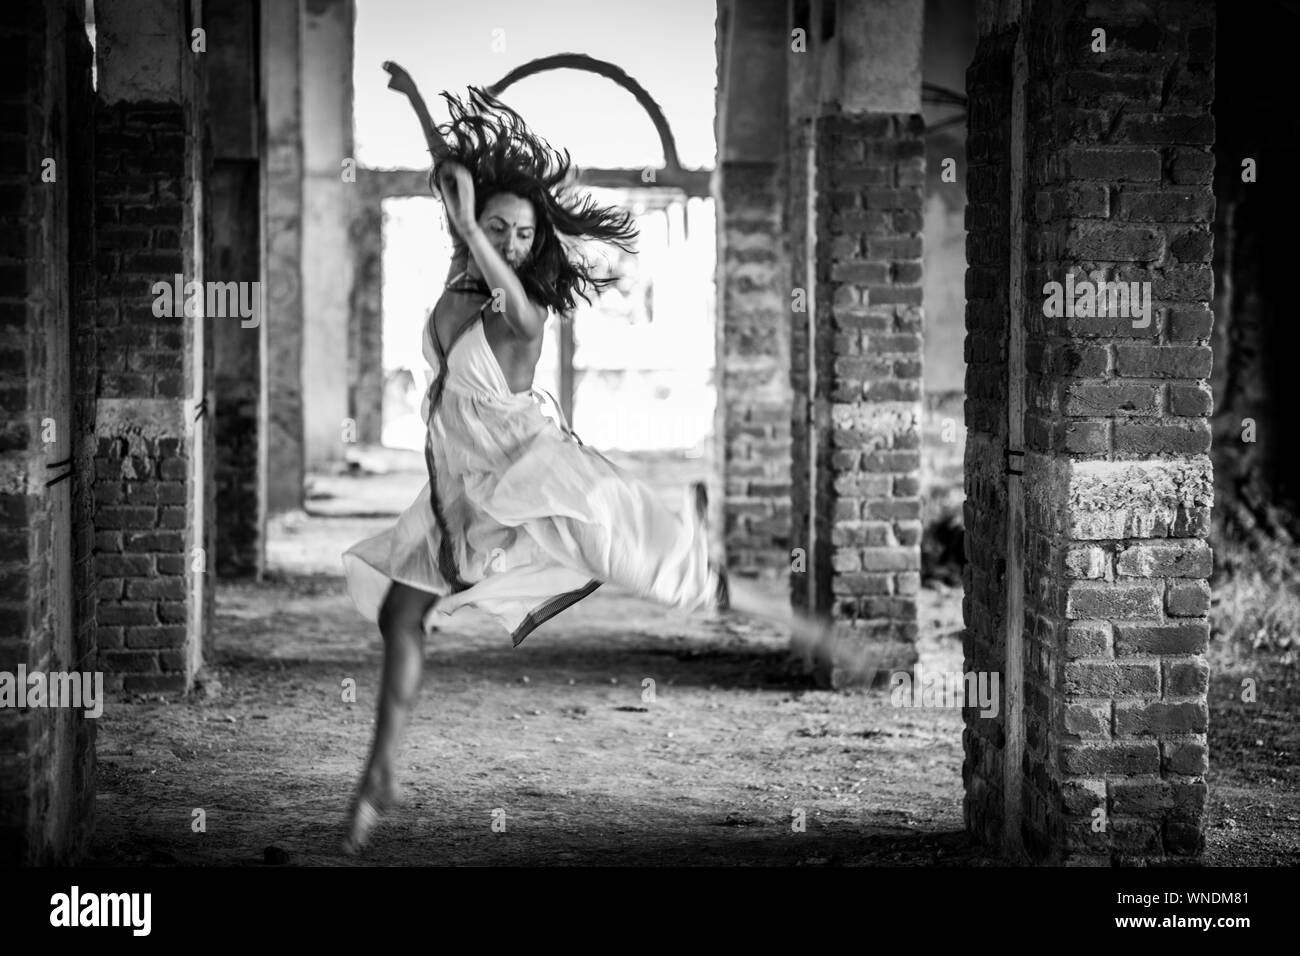 A girl dancing in a abandoned building. Stock Photo